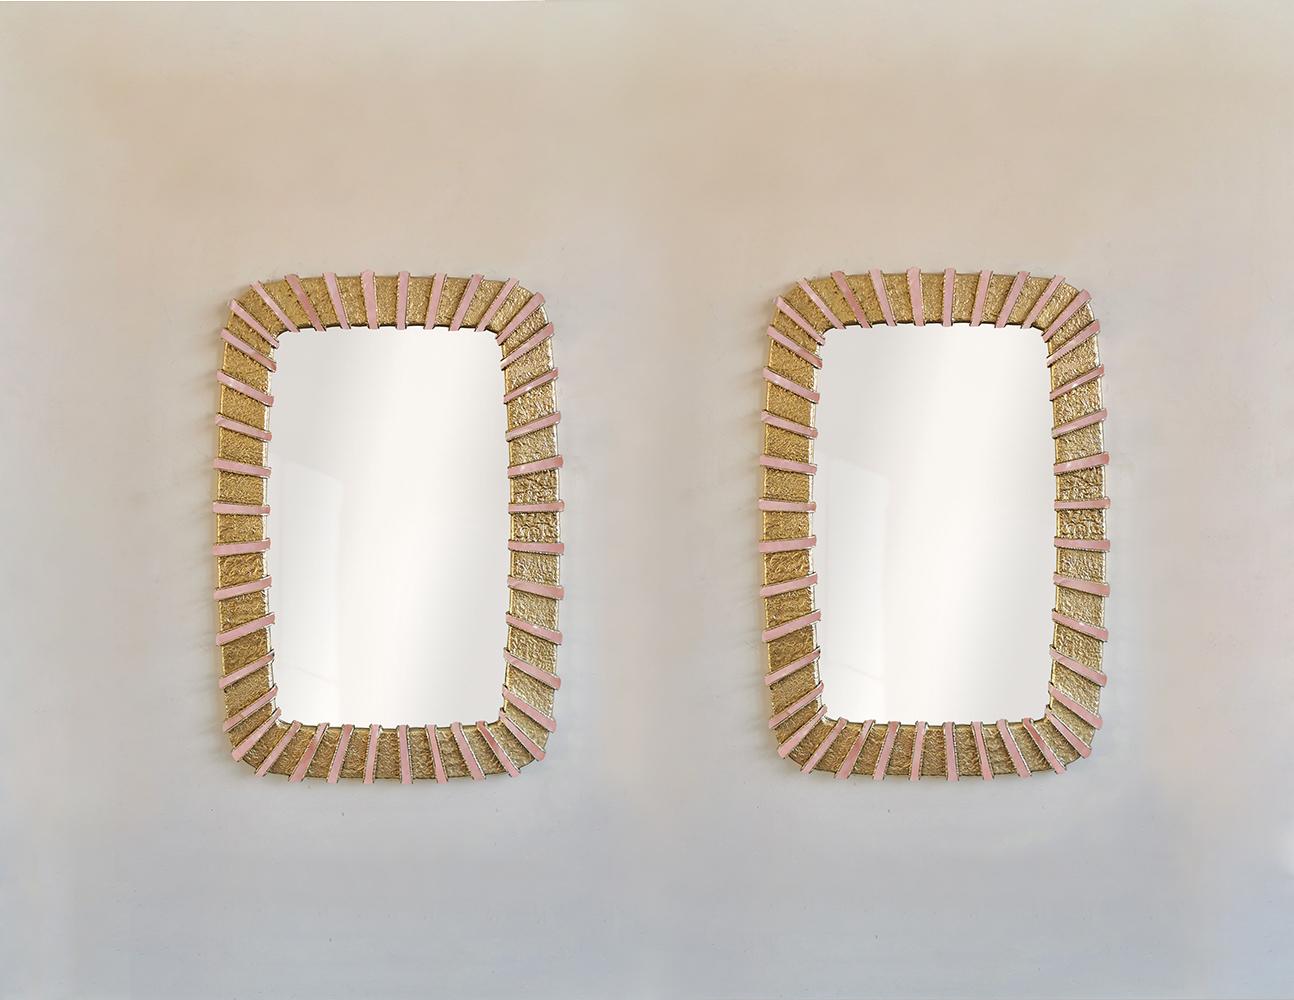 A pair of Soleil mirrors with hammered detail brass and pink rock crystal insert decorations, custom size upon request. Created by Phoenix Gallery.